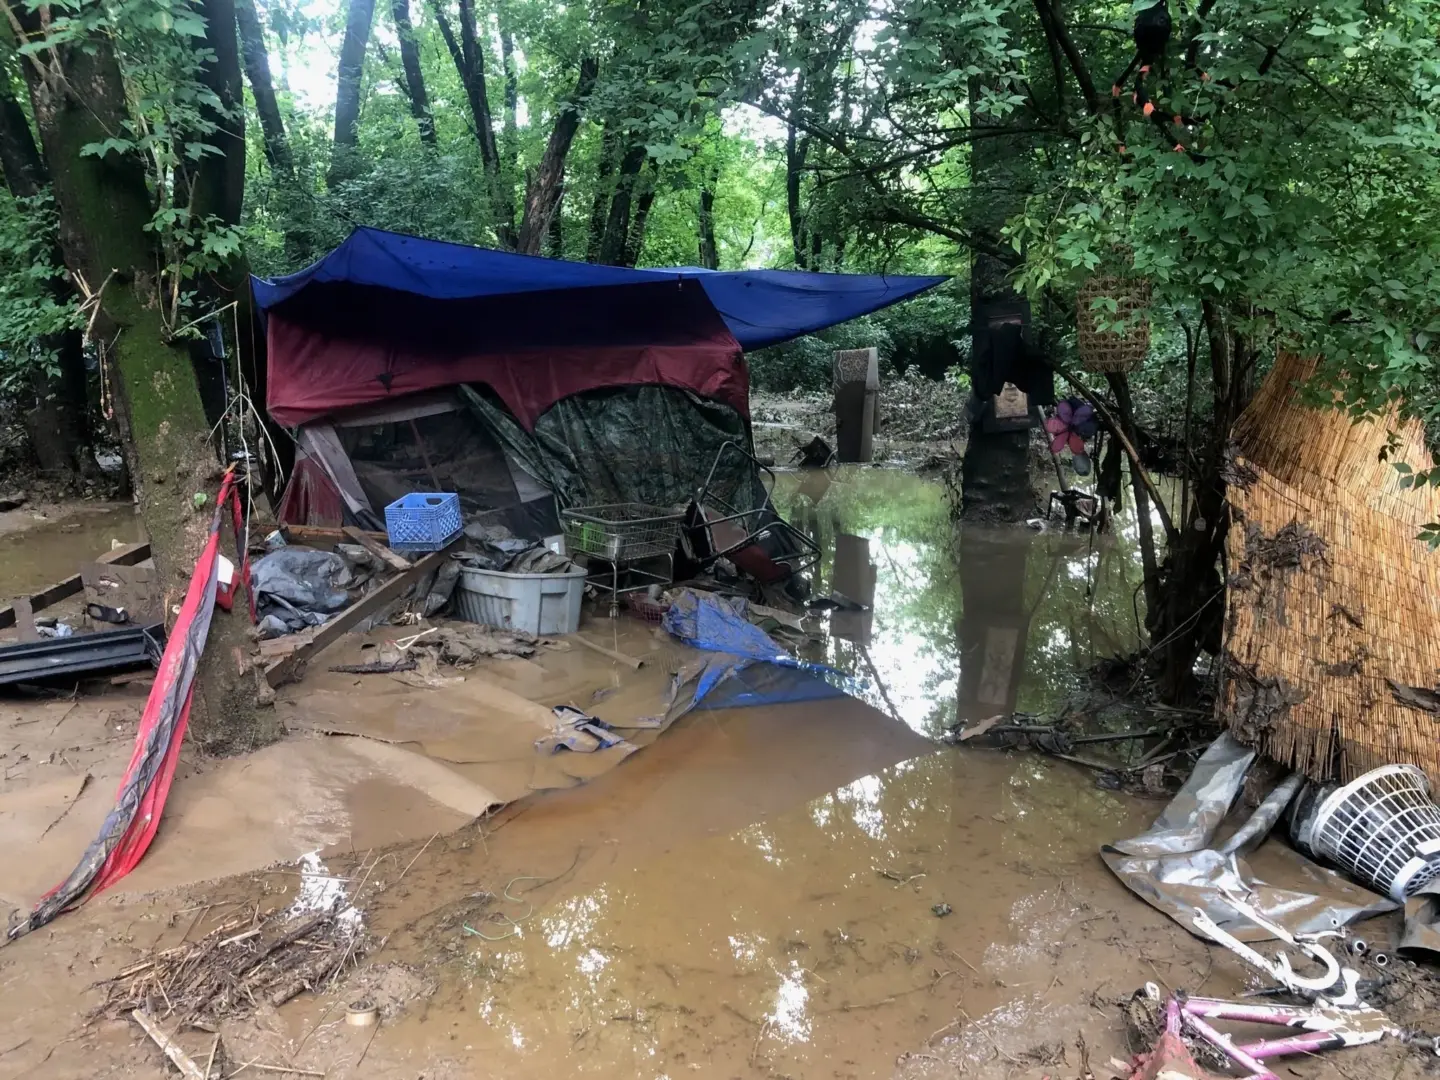 A photo outreach worker Mark Boorse took on the morning of July 10, 2023, showing the encampment by the Schuylkill River in Pottstown flooded. By this point, the water had already started to recede. (Mark Boorse/Access Services)
